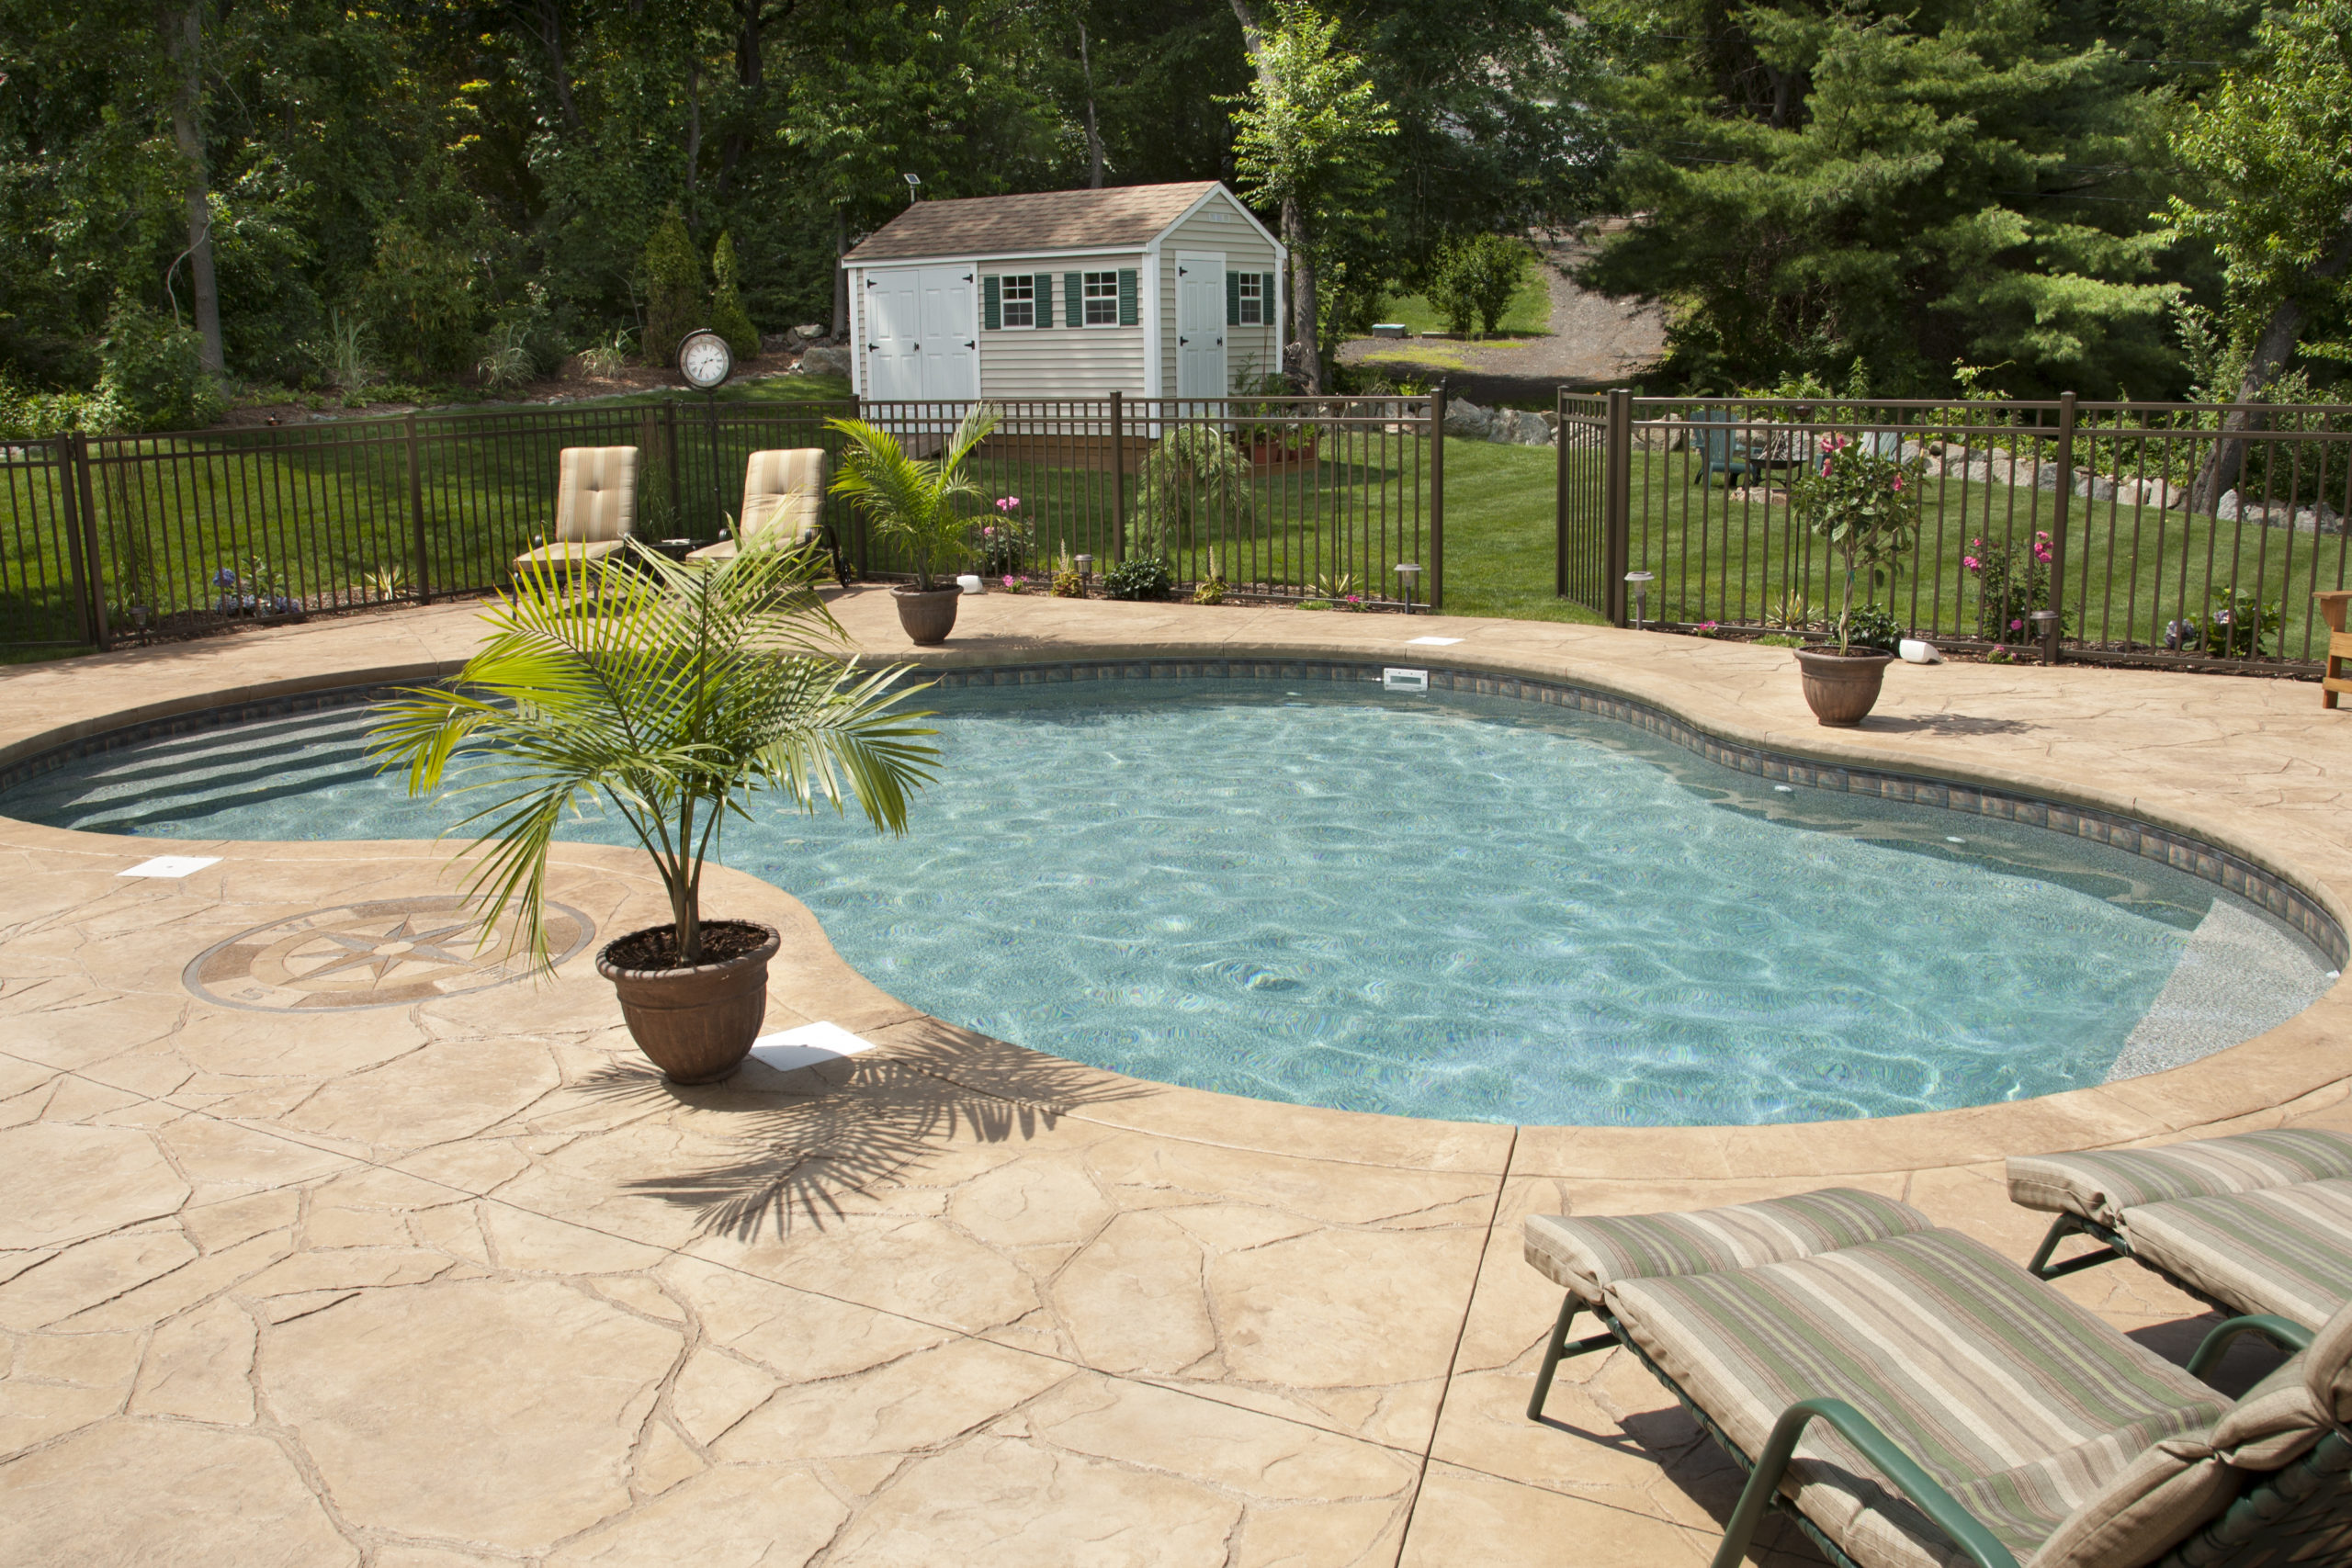 This is an image of a stamped concrete pool deck on a residential property.